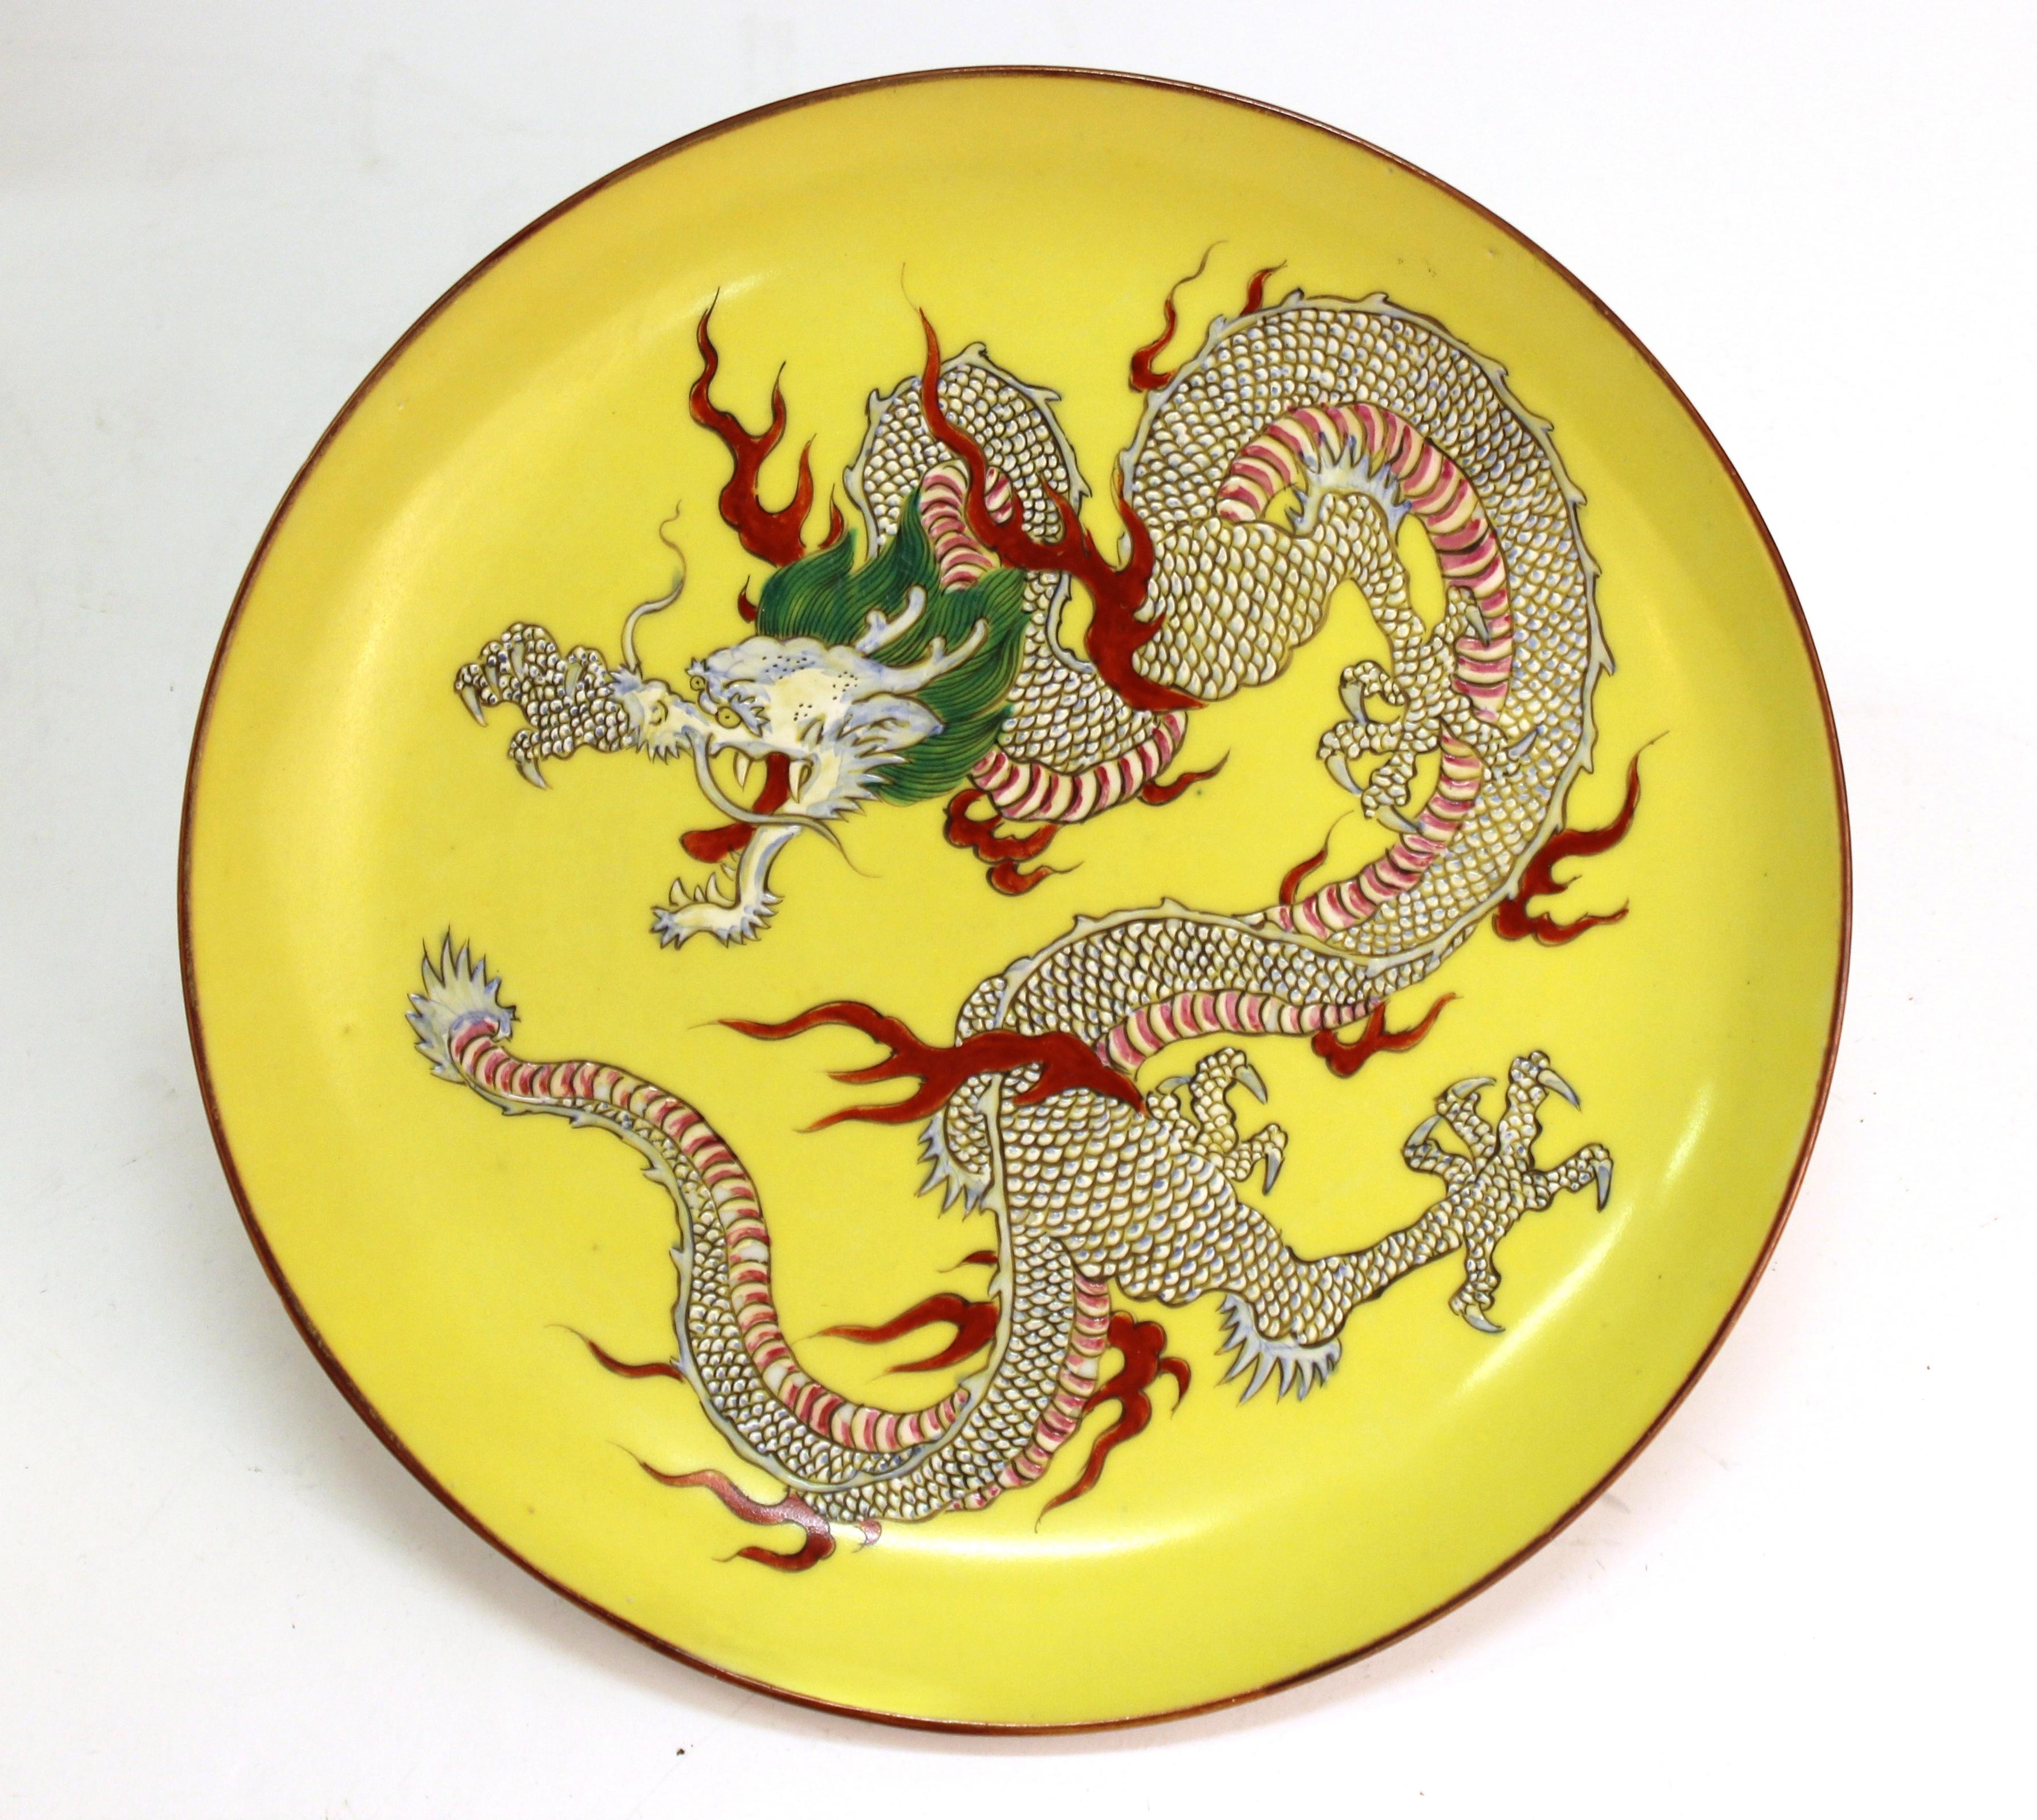 Chinese yellow porcelain decorative charger depicting a hand painted five-clawed dragon. The piece was made in China during the 1890s-1900s and is in great vintage condition with age-appropriate wear.